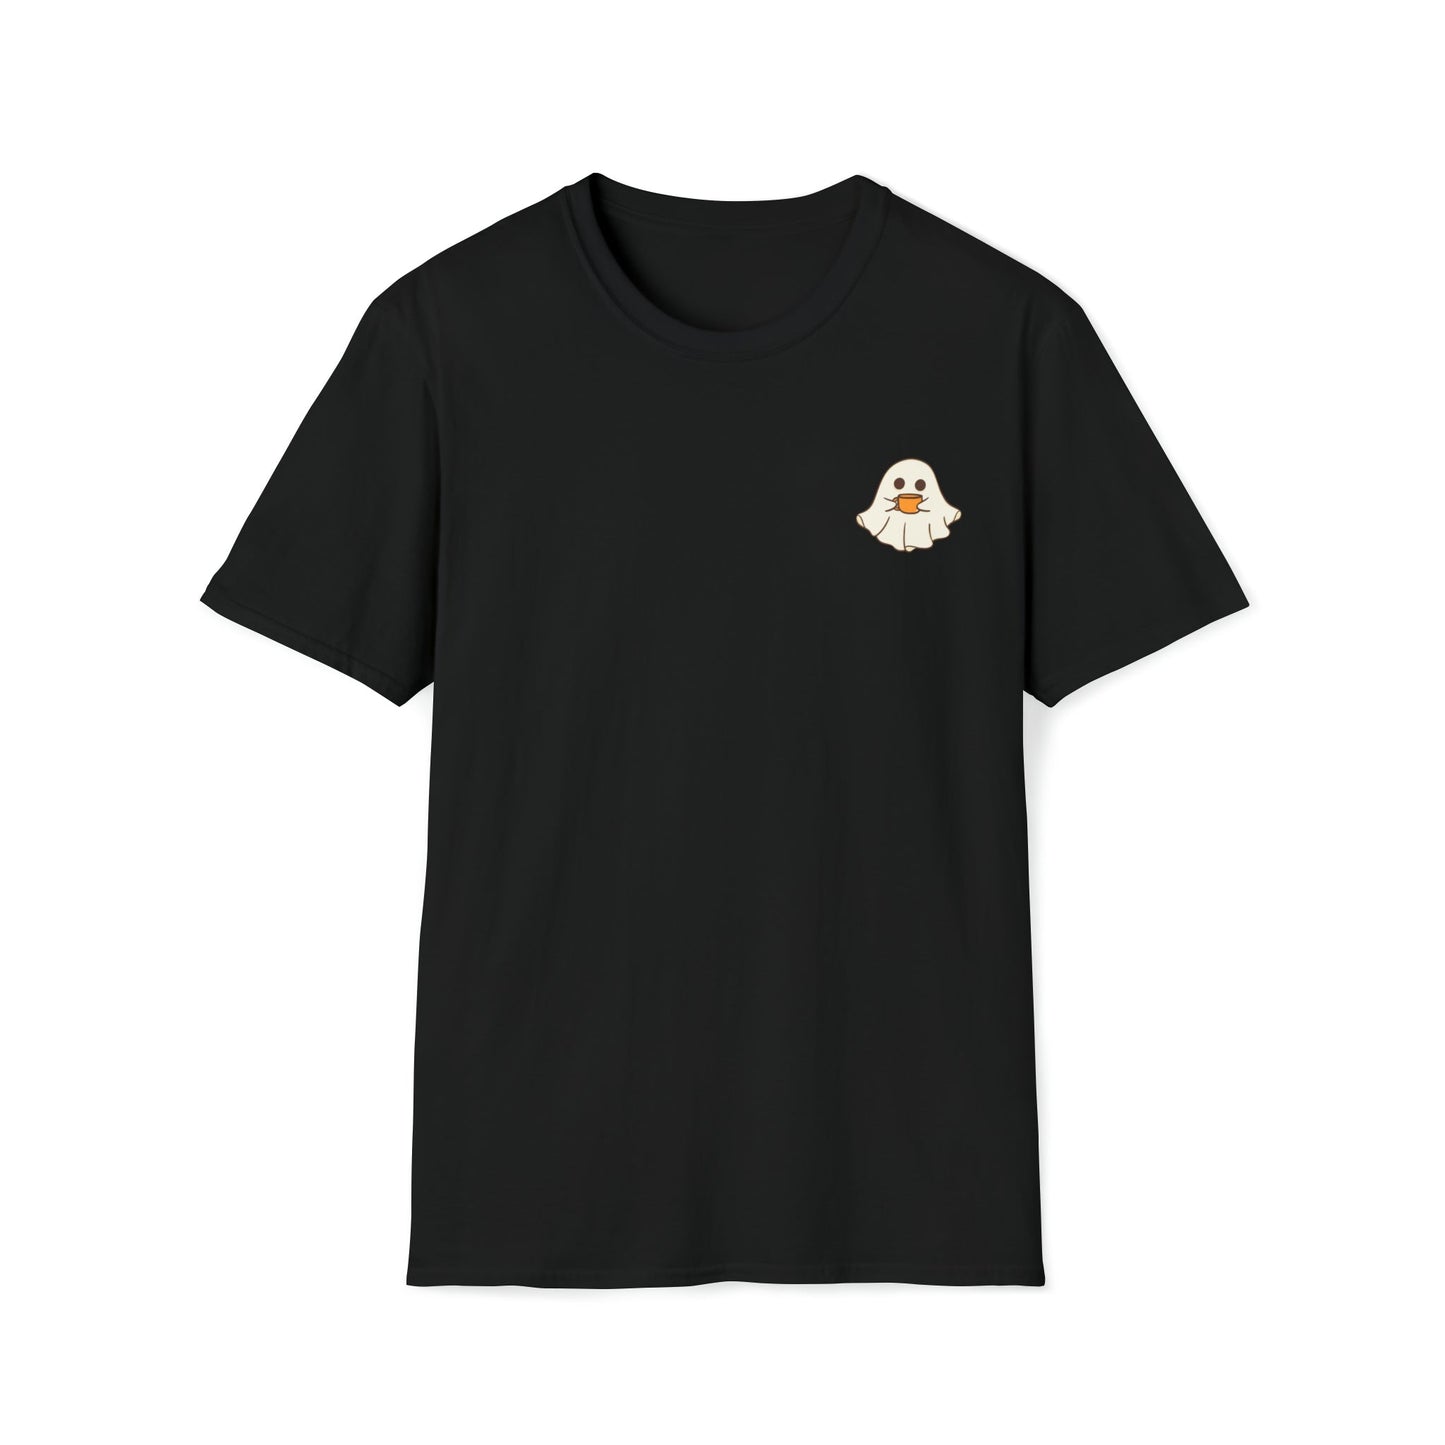 Get trendy with Ghost drinking coffeeT-Shirt - T-Shirt available at Good Gift Company. Grab yours for $24.95 today!